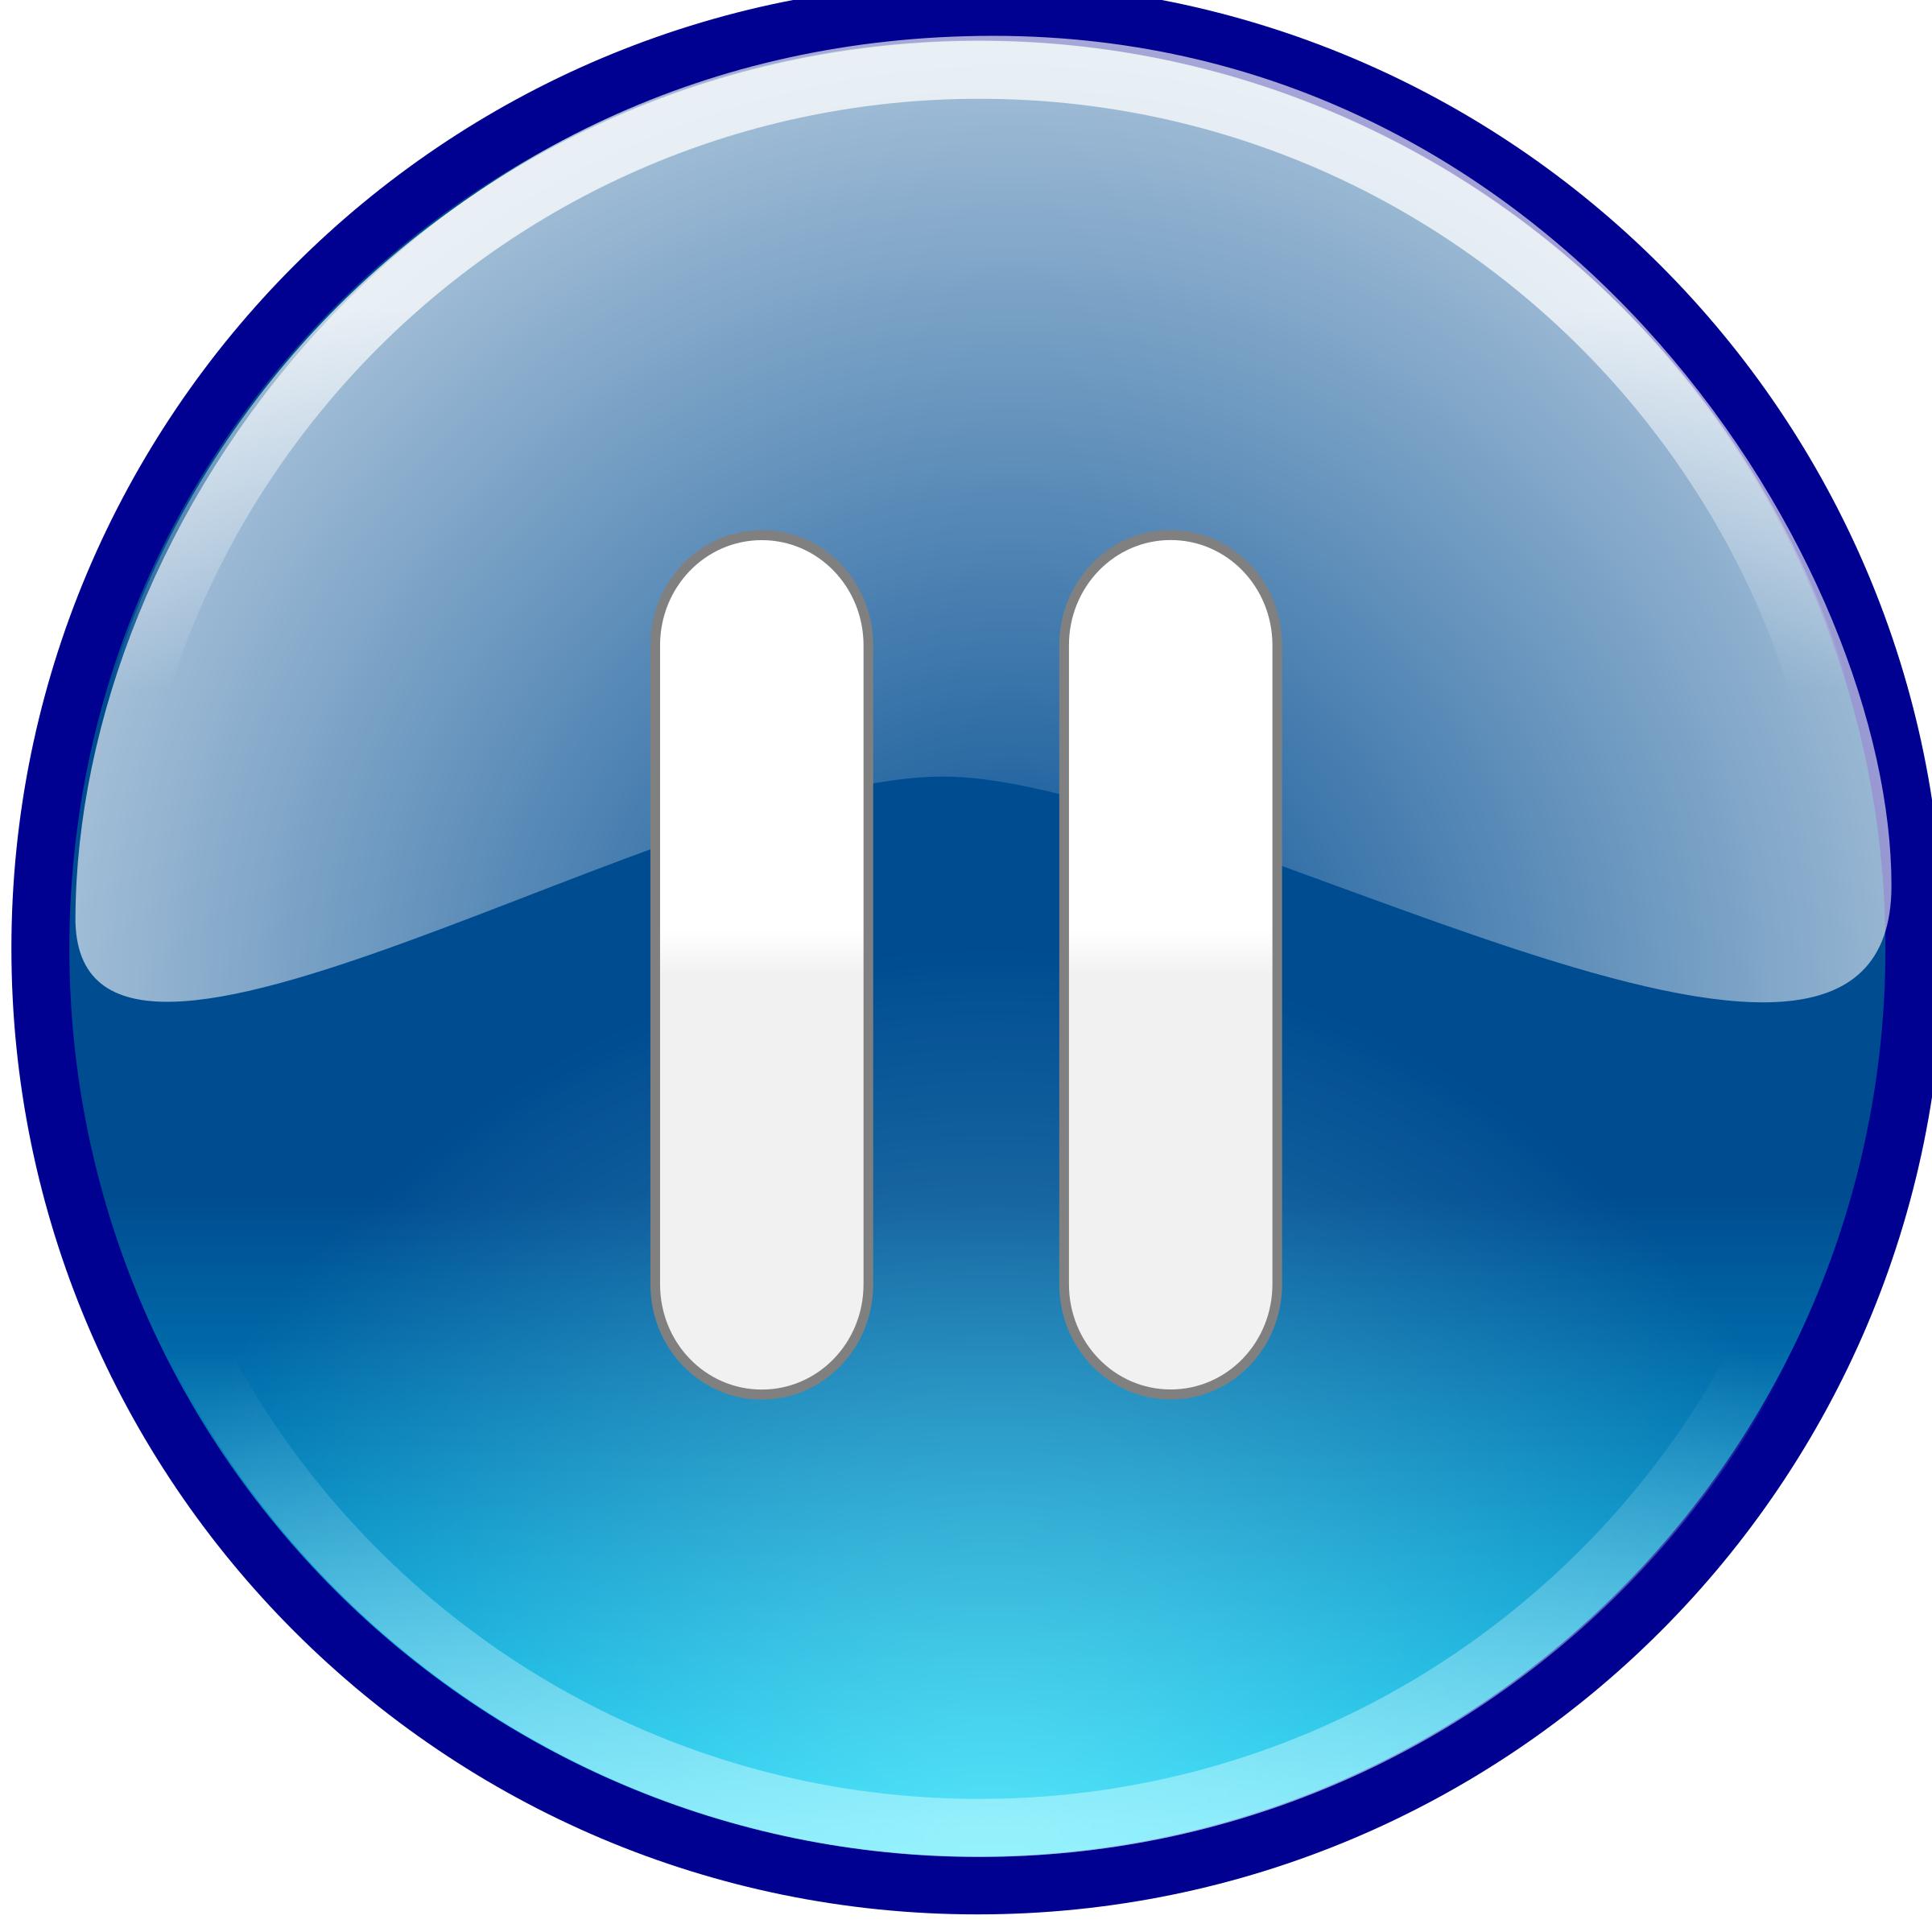 Windows Media Player Pause Button - Pause Button, Transparent background PNG HD thumbnail